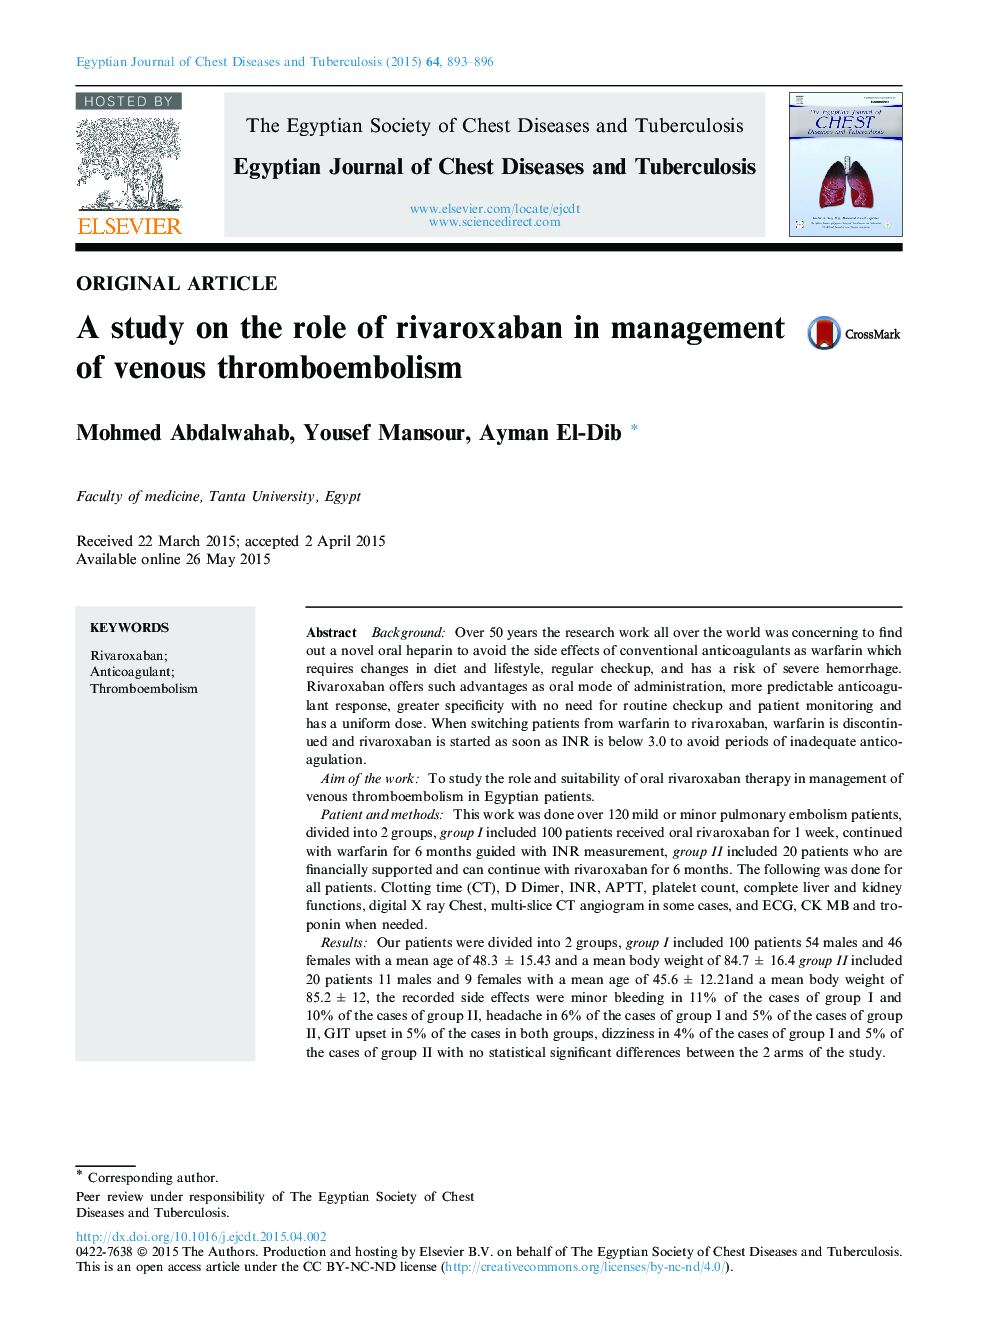 A study on the role of rivaroxaban in management of venous thromboembolism 